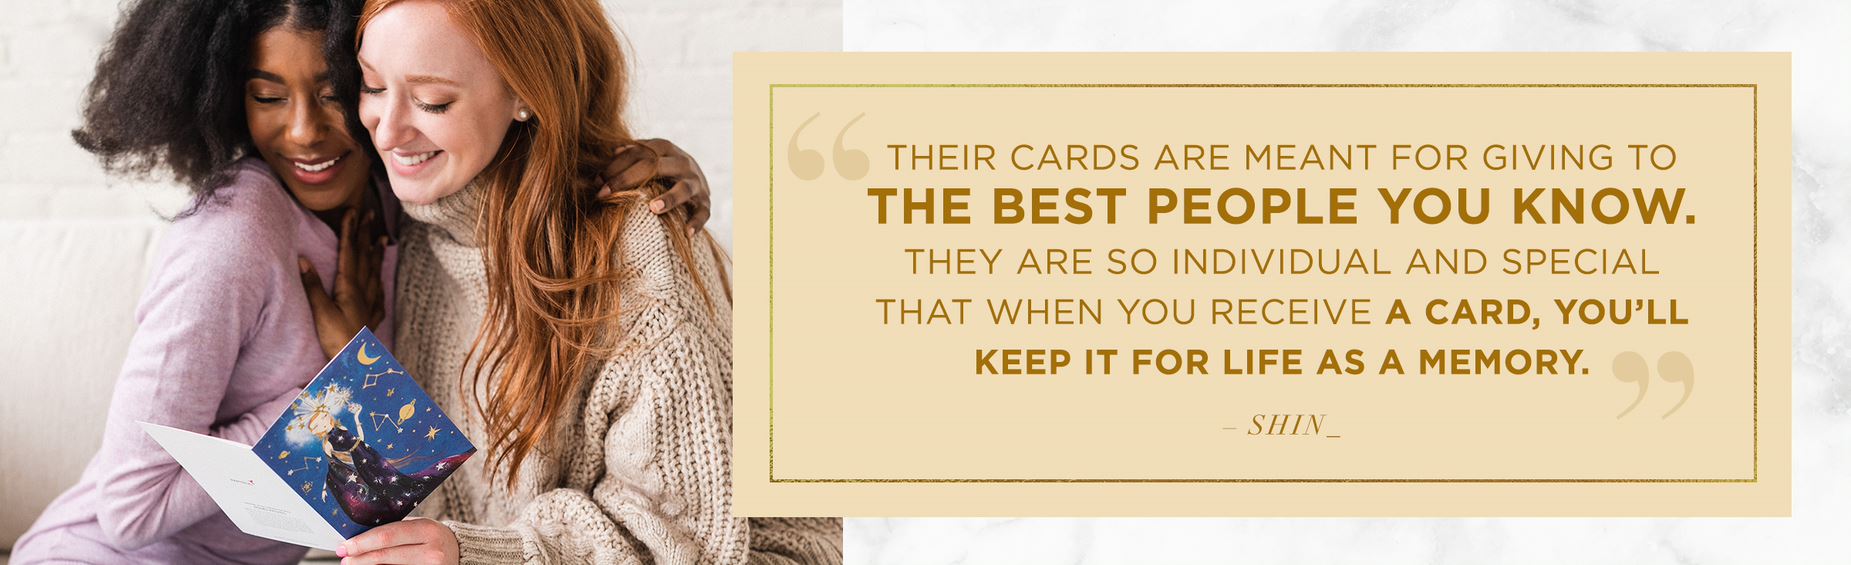 Their cards are meant for giving to the best people you know. They are so individual and special that when you receive a card, you will keep it for life as a memory